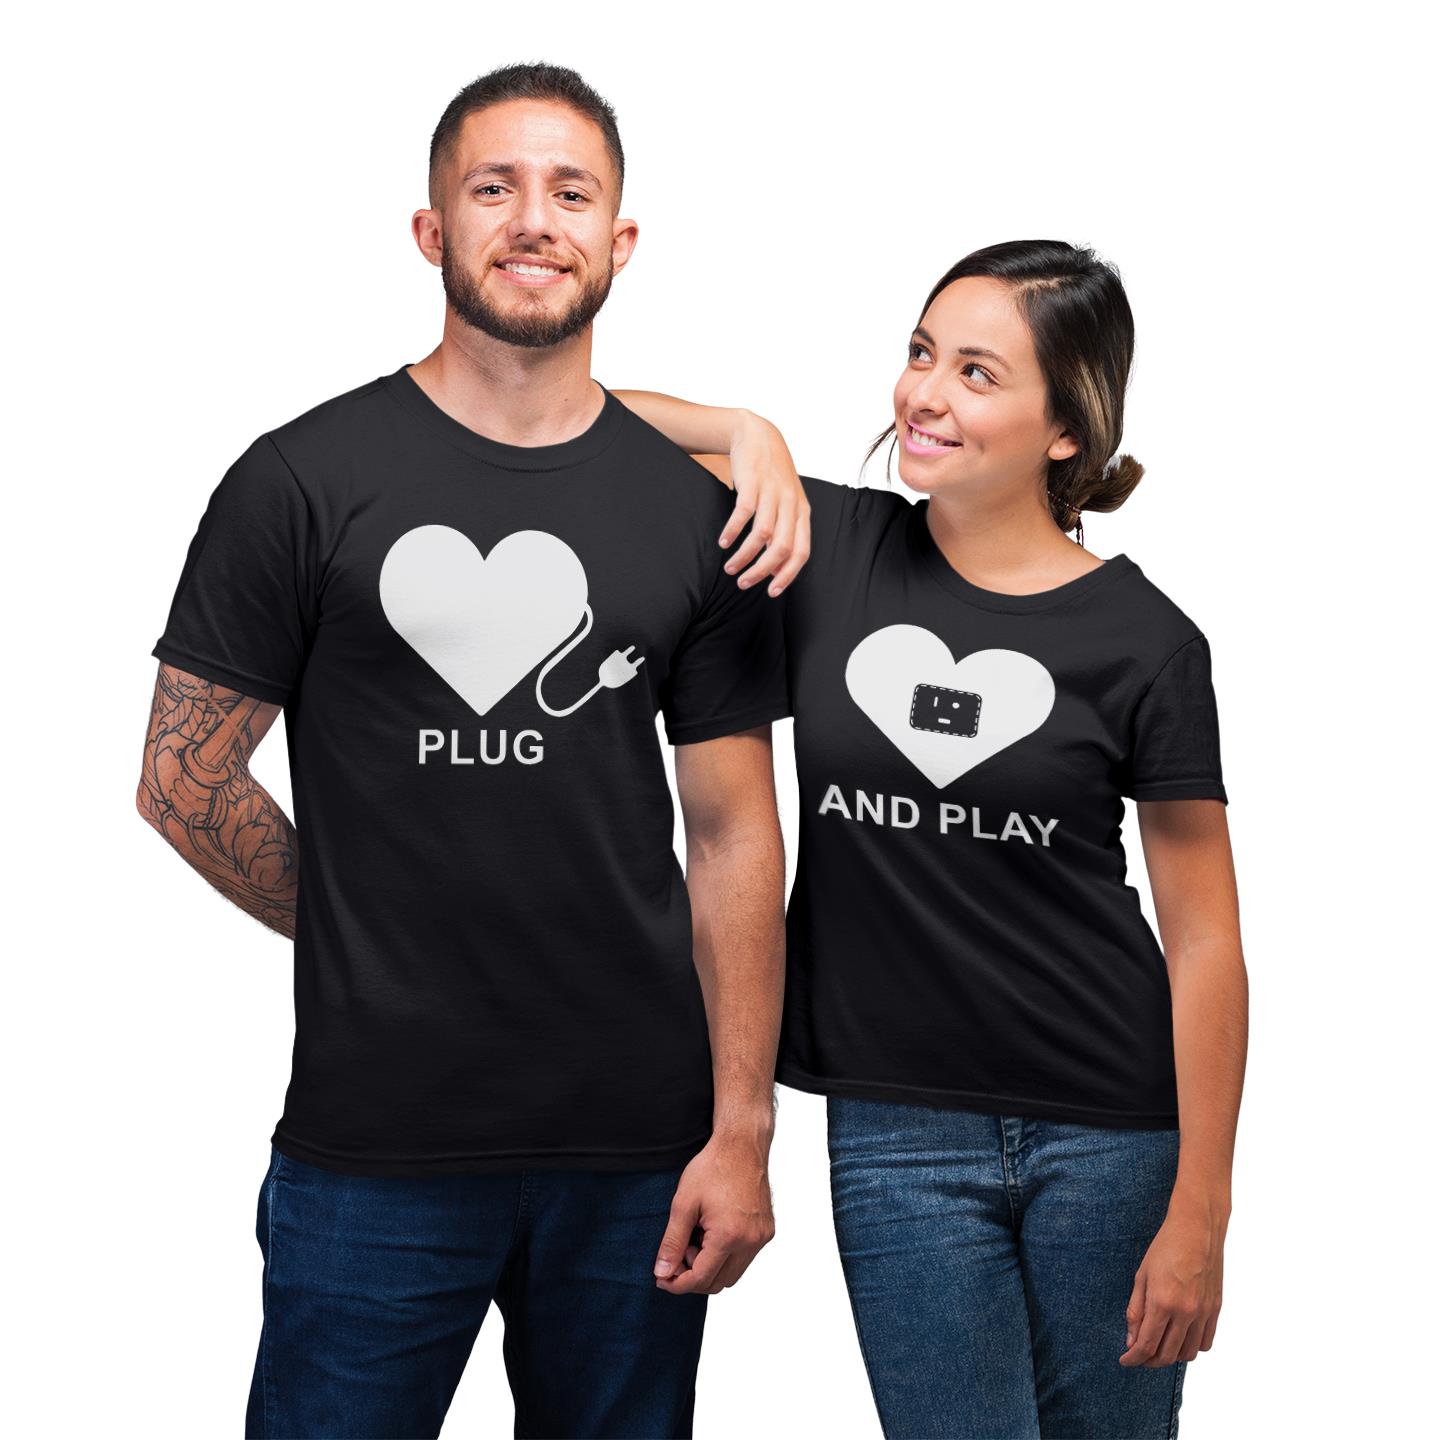 Plug And Play Funny Shirt For Couple Matching His And Hers T-shirt